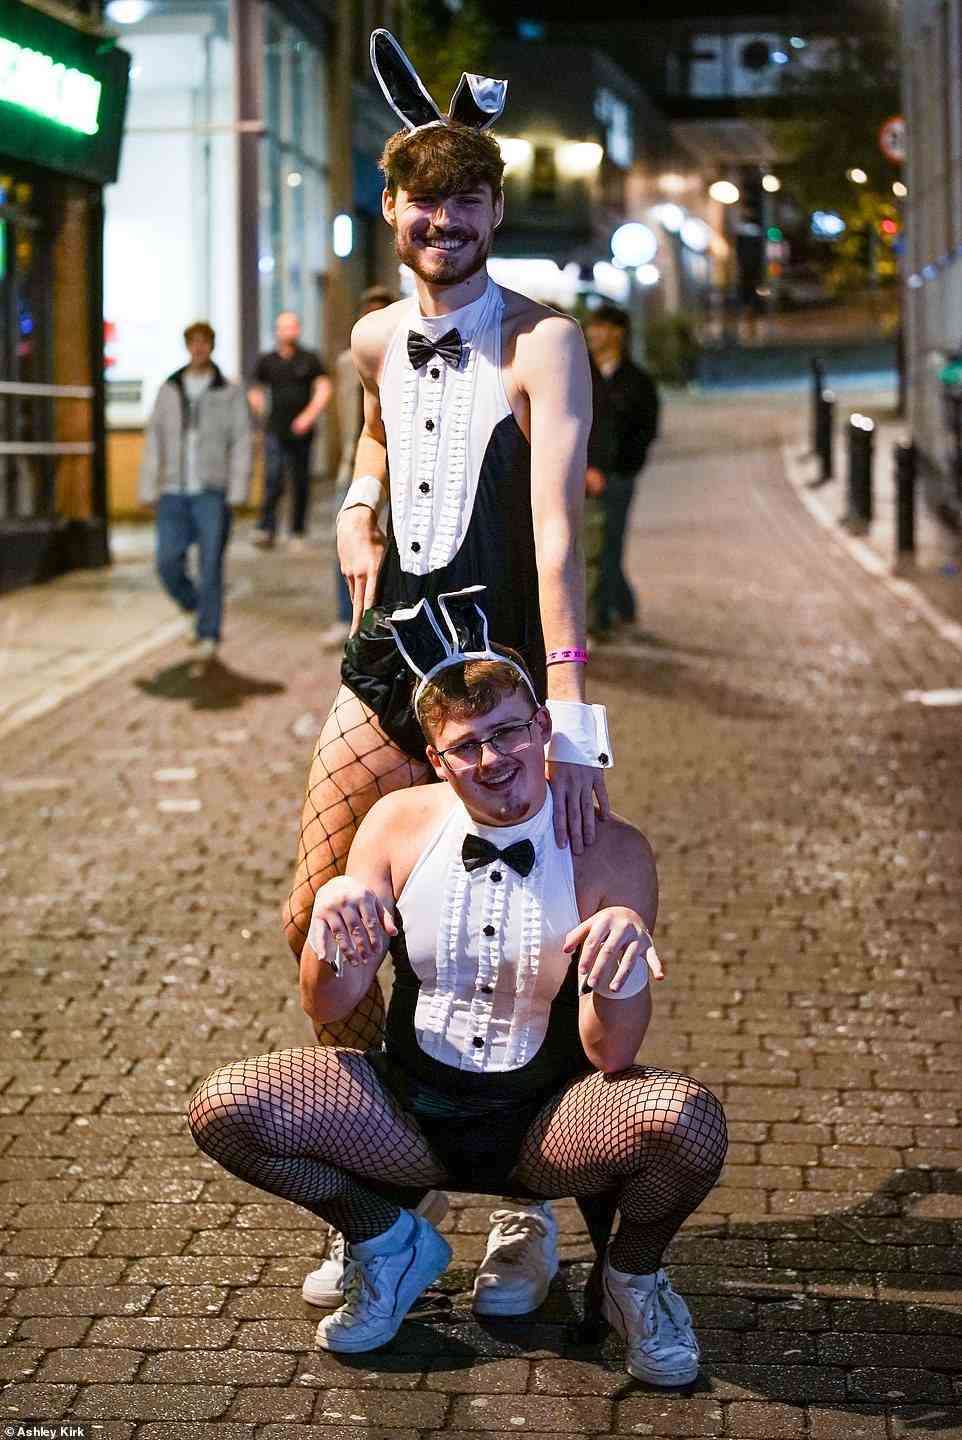 Two men wear a daring take on the Playboy bunny outfit in Nottingham city centre last night